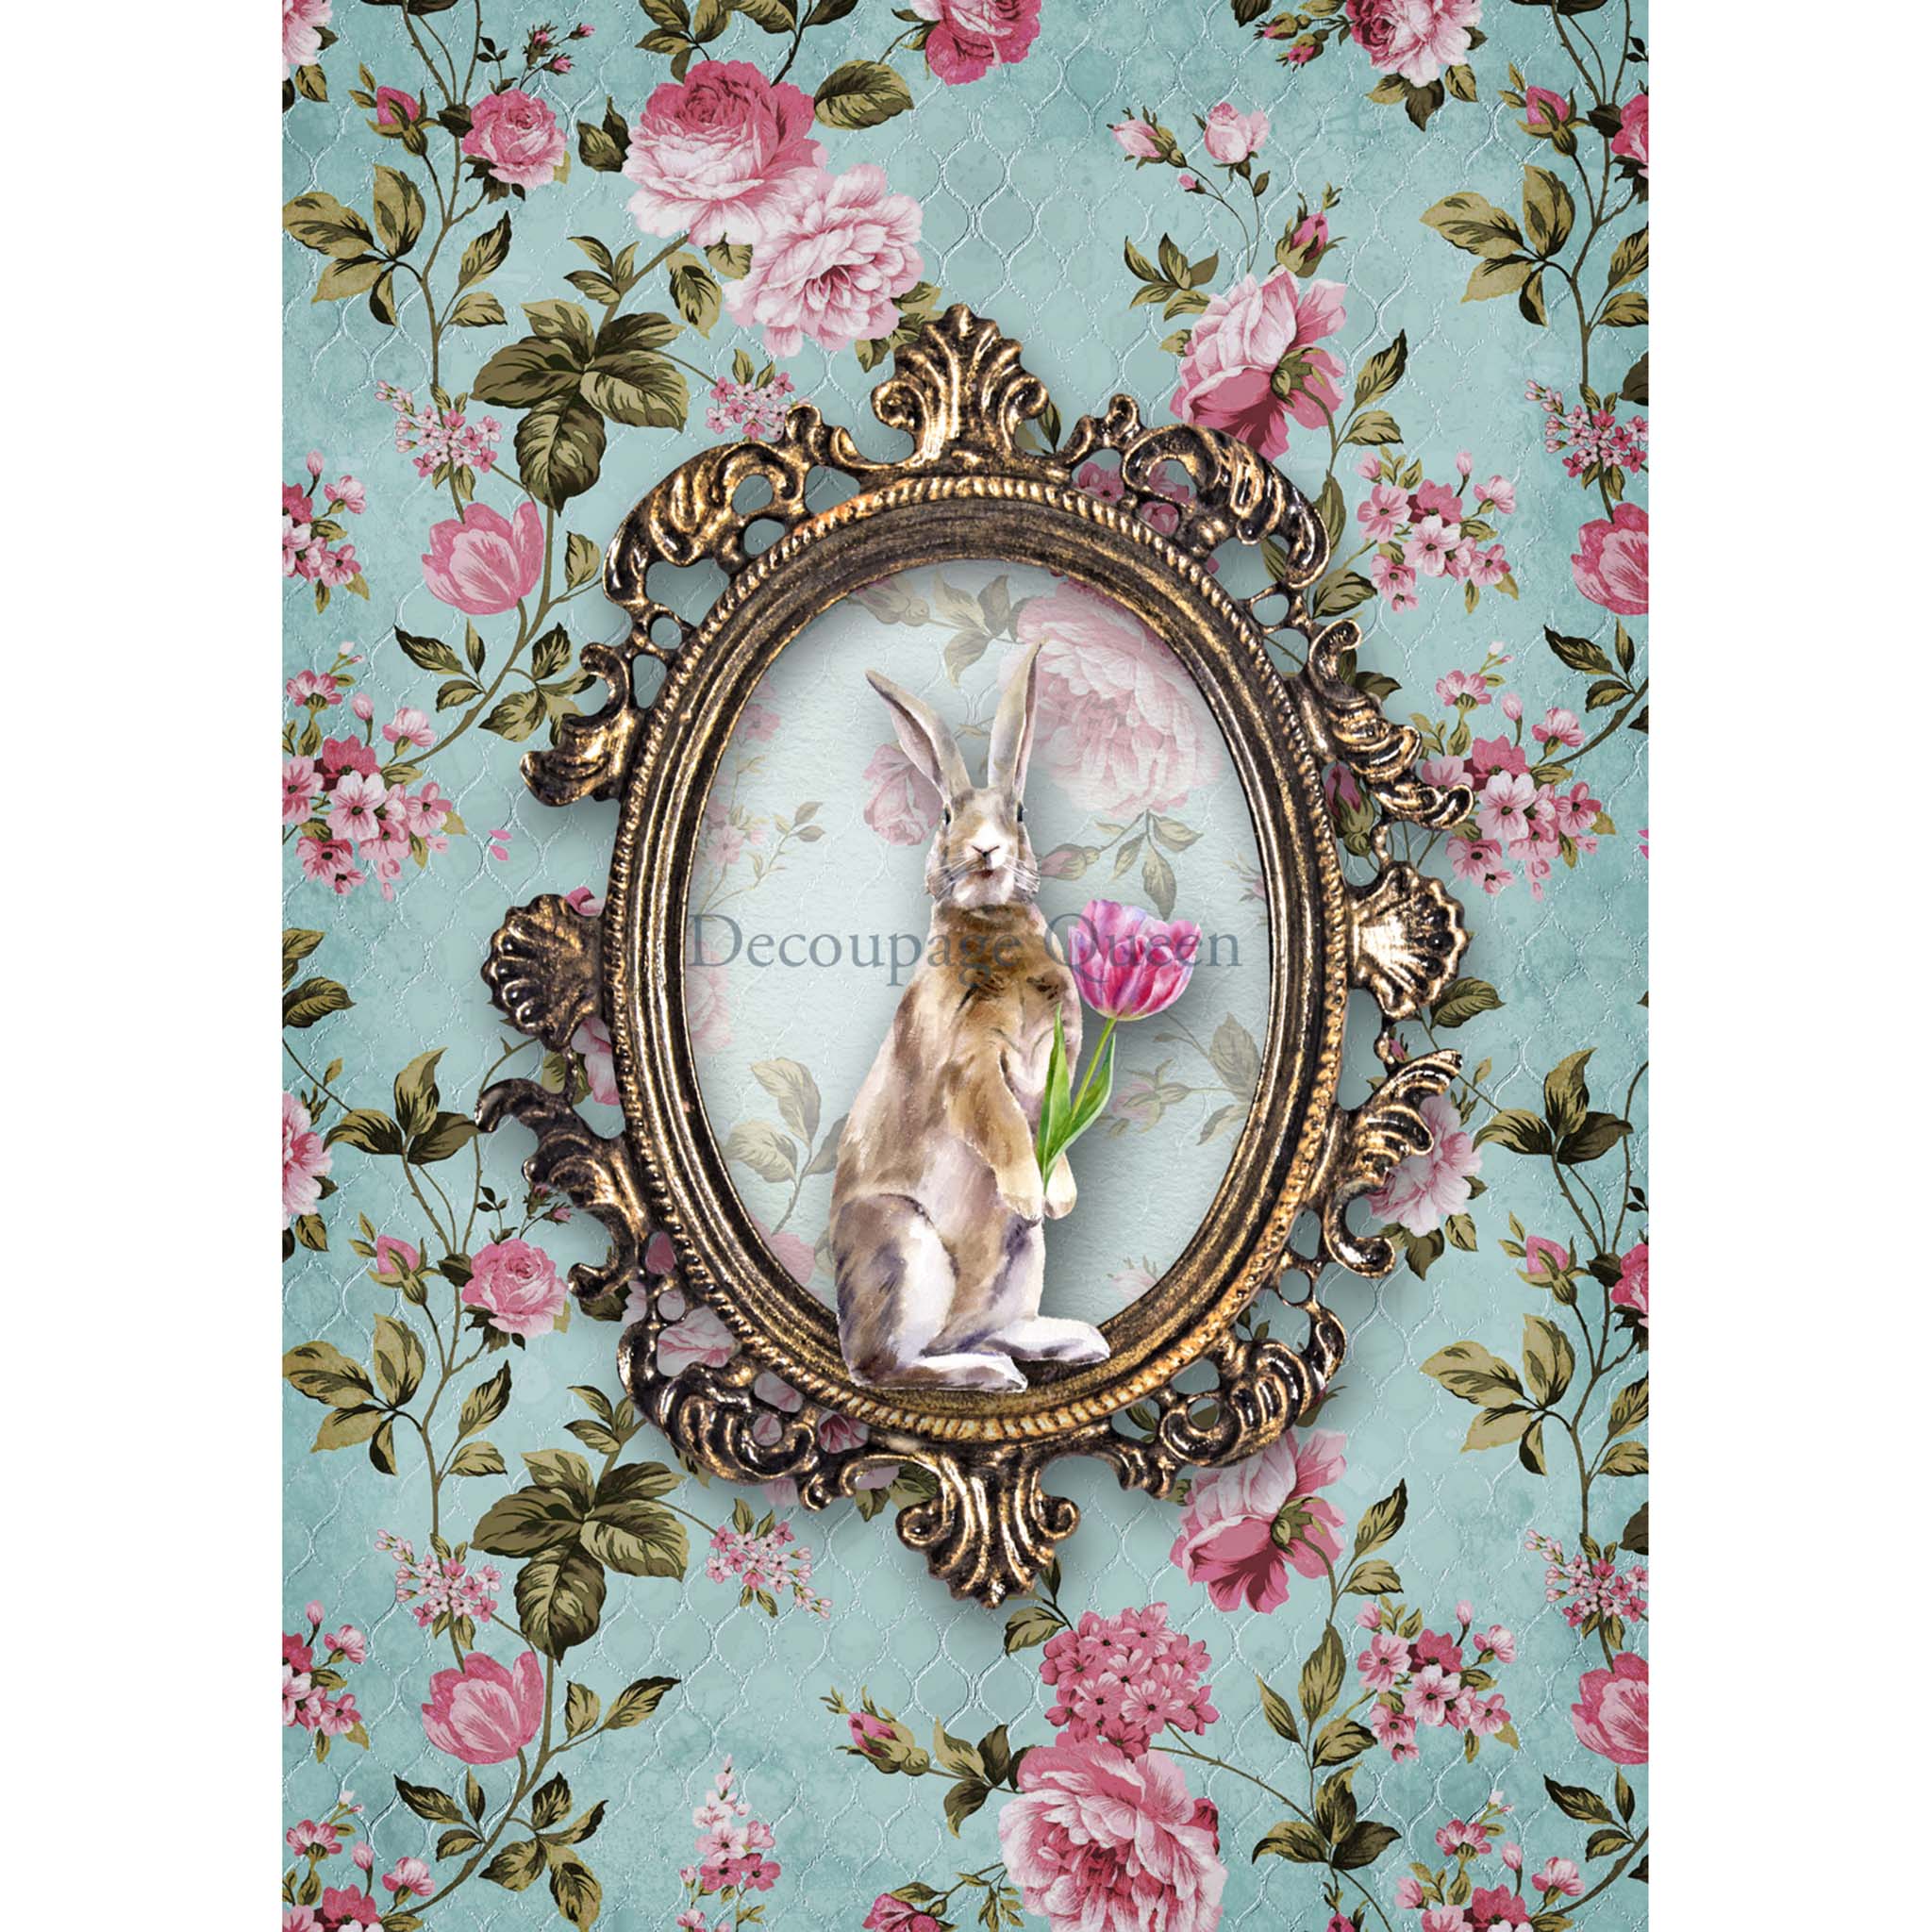 A2 rice paper design that features a charming brown bunny holding a tulip in an ornate frame, surrounded by pink flowers on an aqua background. White borders are on the sides.